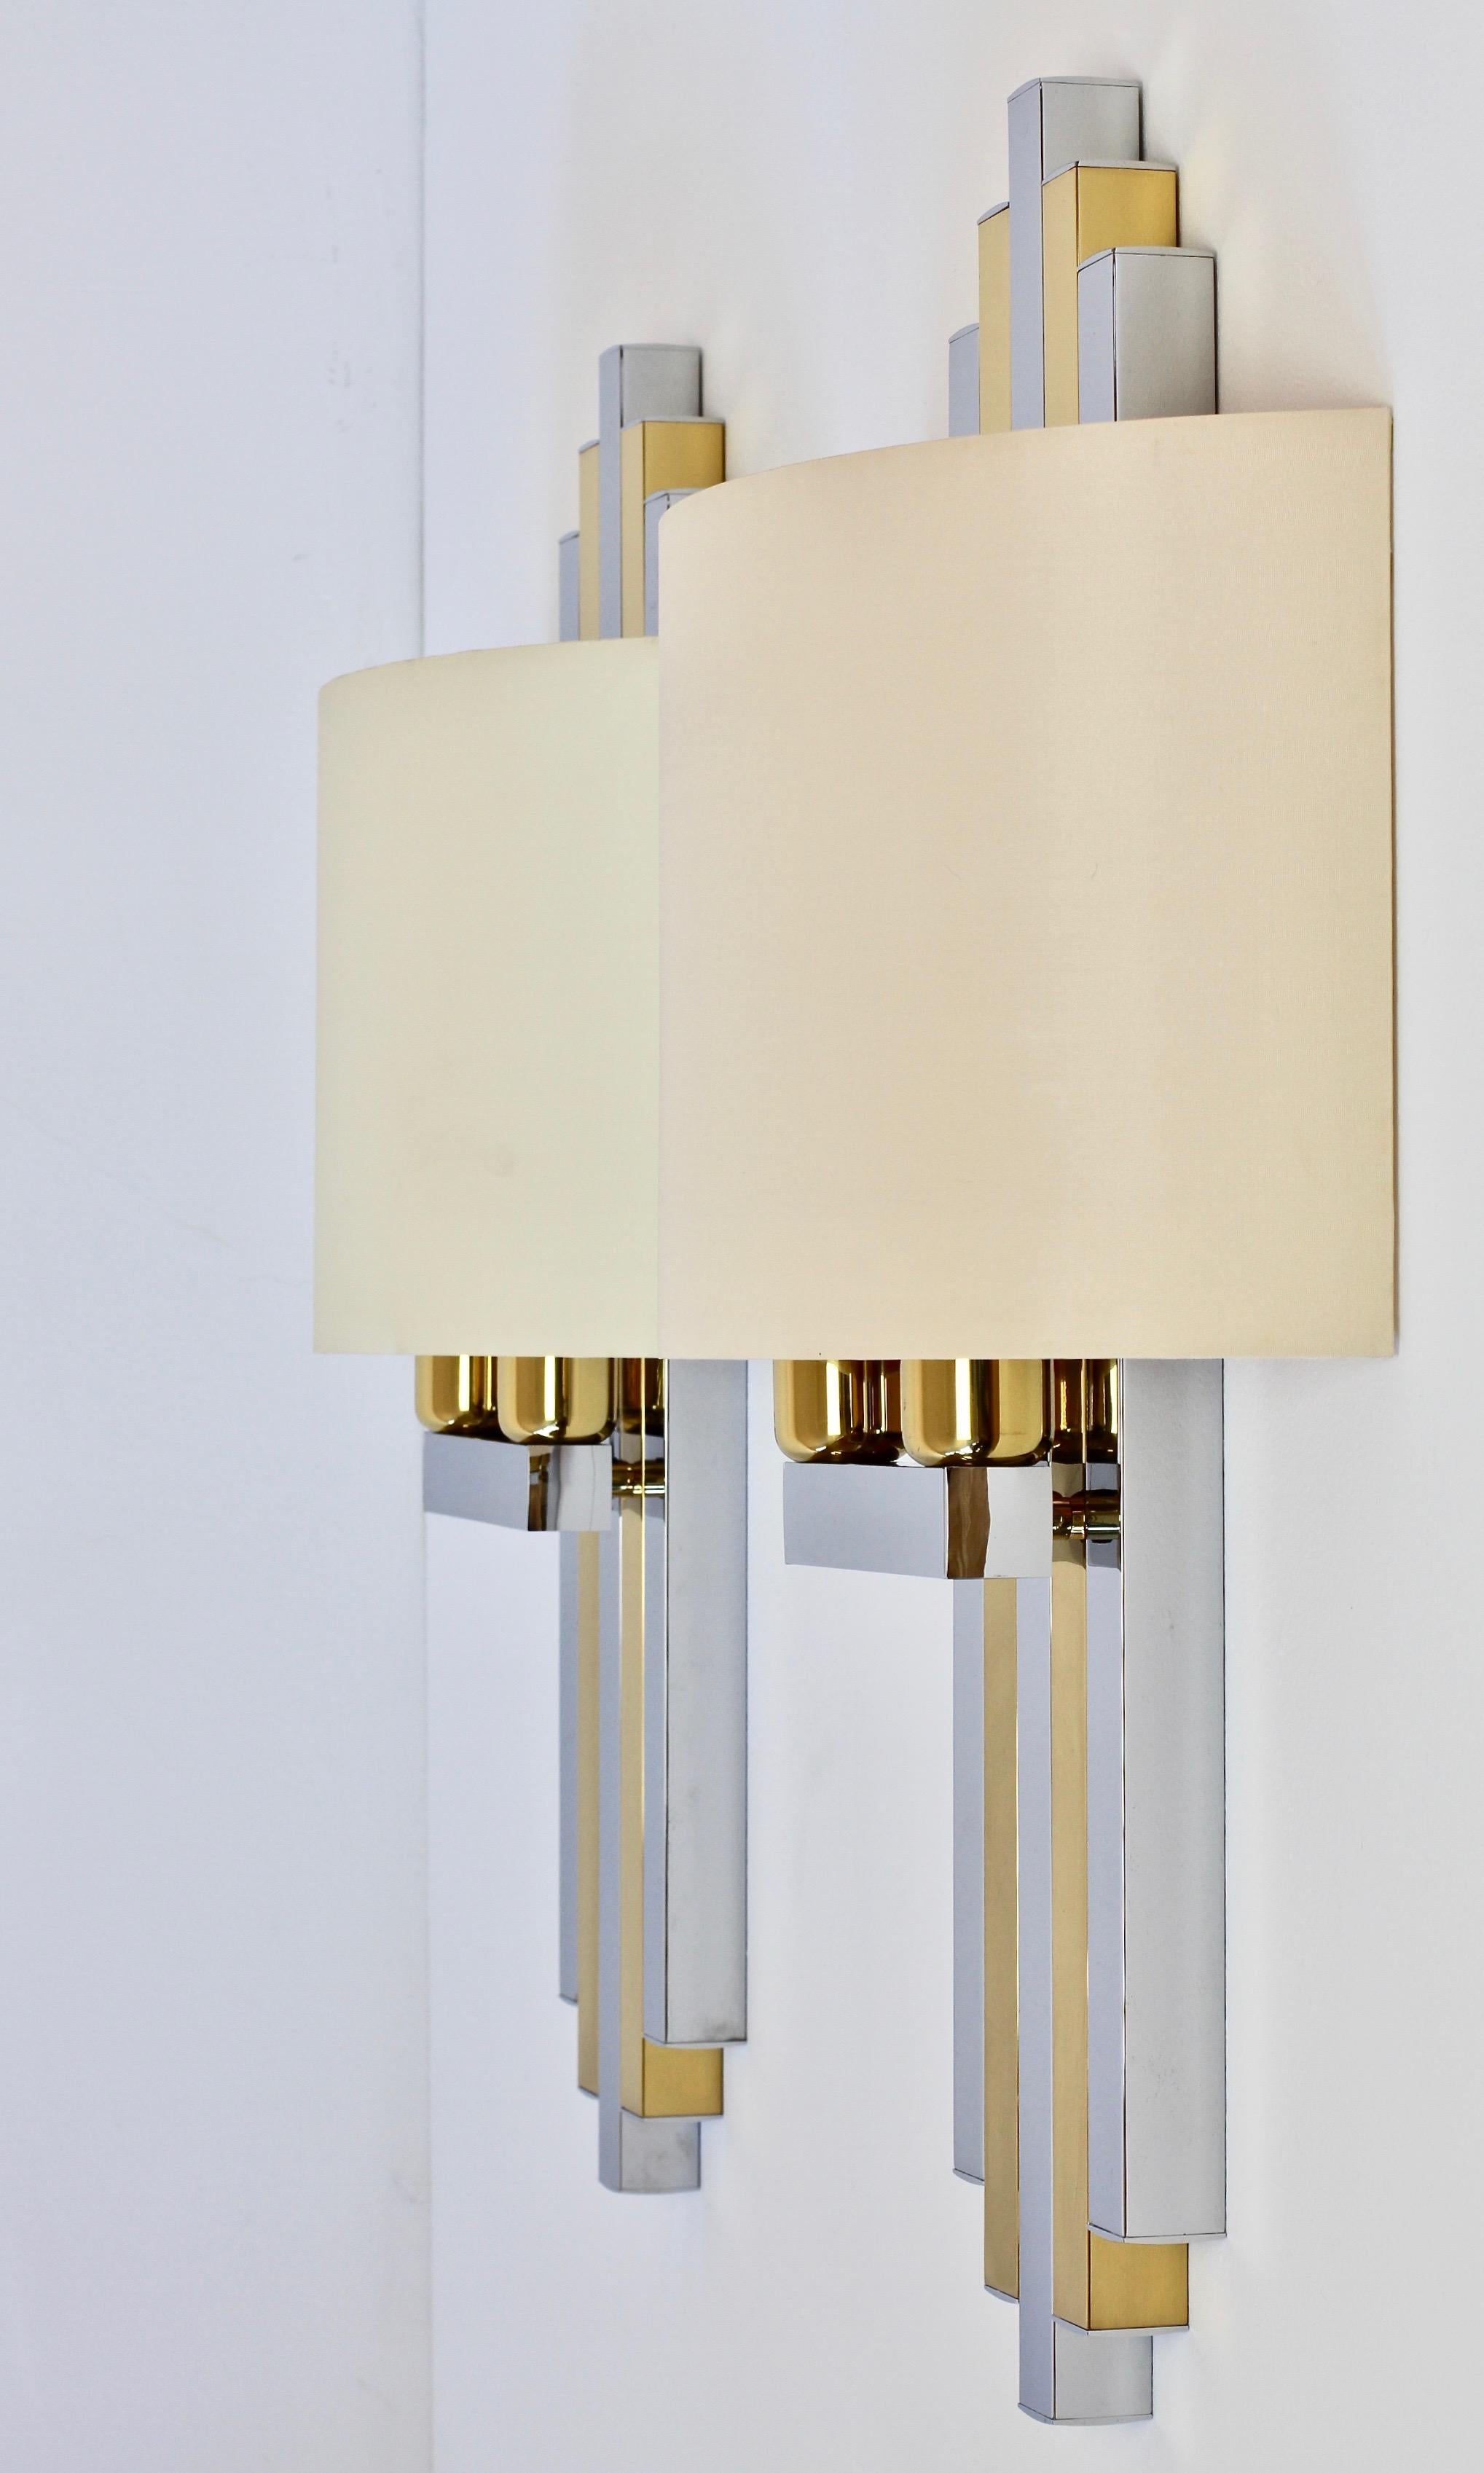 Mid-Century Modern vintage Italian pair of wall lights or sconces, made circa late 1970s-early 1980s. Featuring chrome and polished brass these lamps lend themselves to any modern home decor as well as the Mid-Century Modern or Hollywood Regency